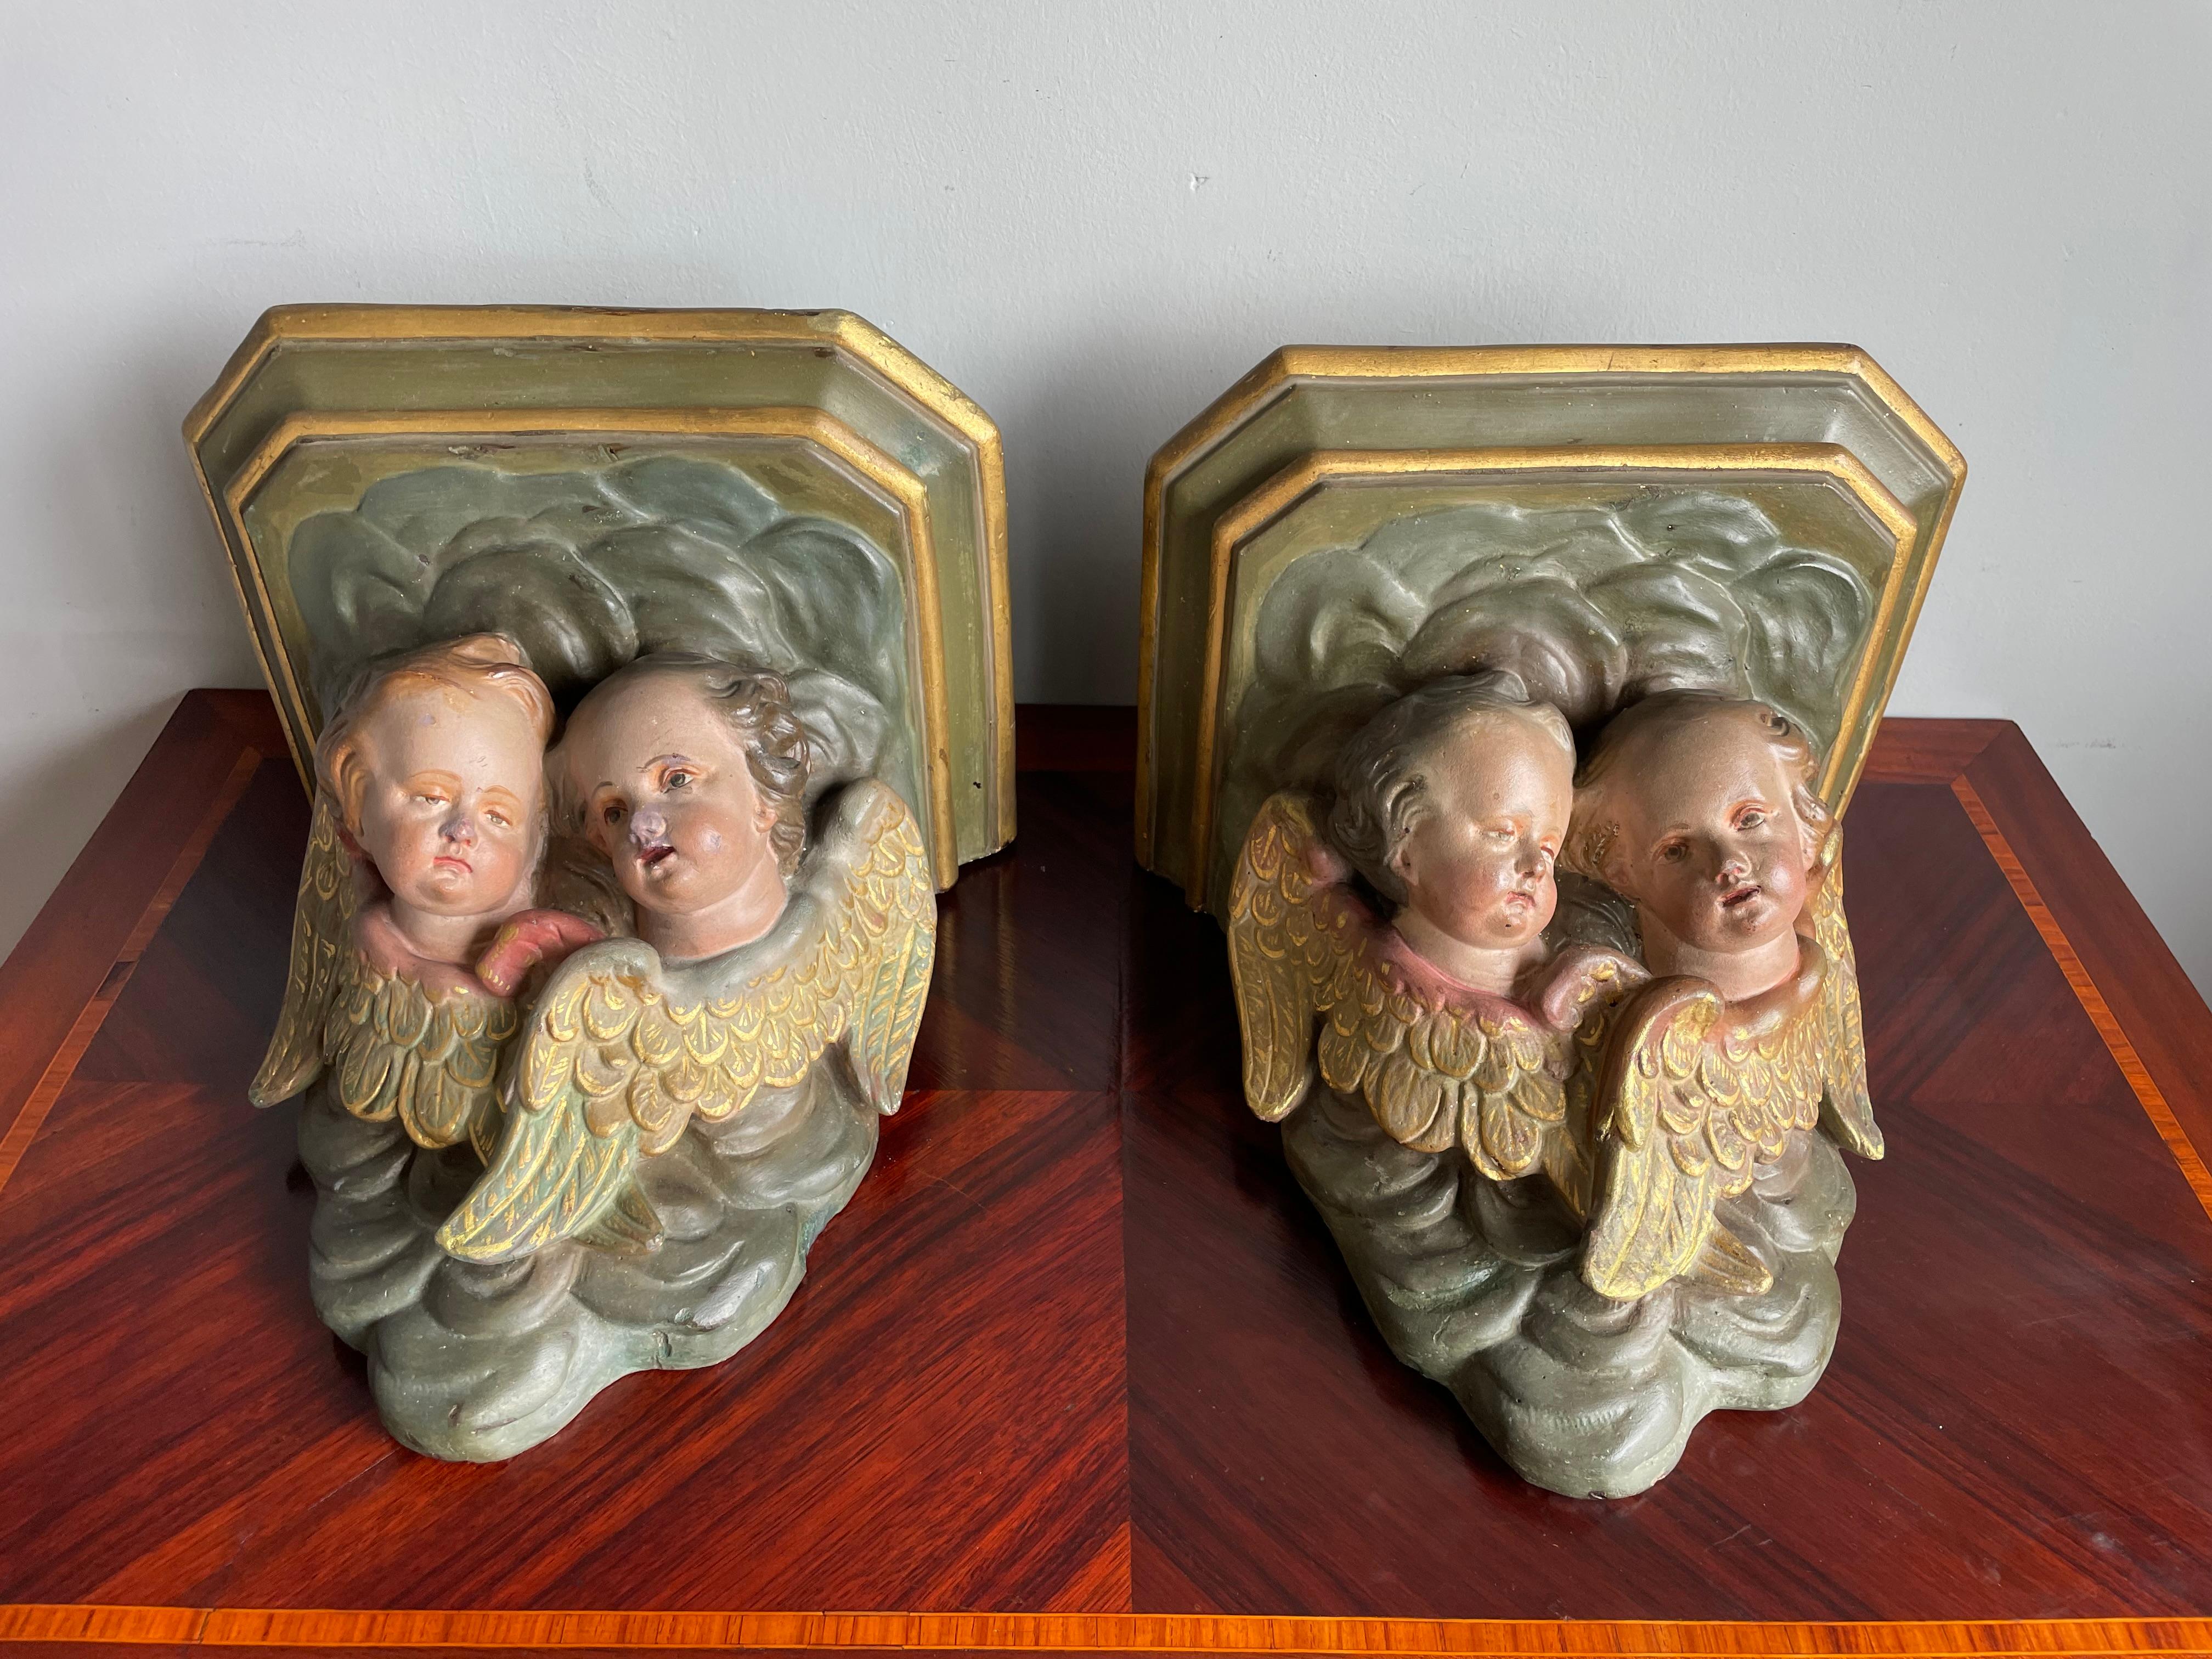 Antique & Rare Pair of Church Brackets for Saint Statues with Angel Sculptures For Sale 8